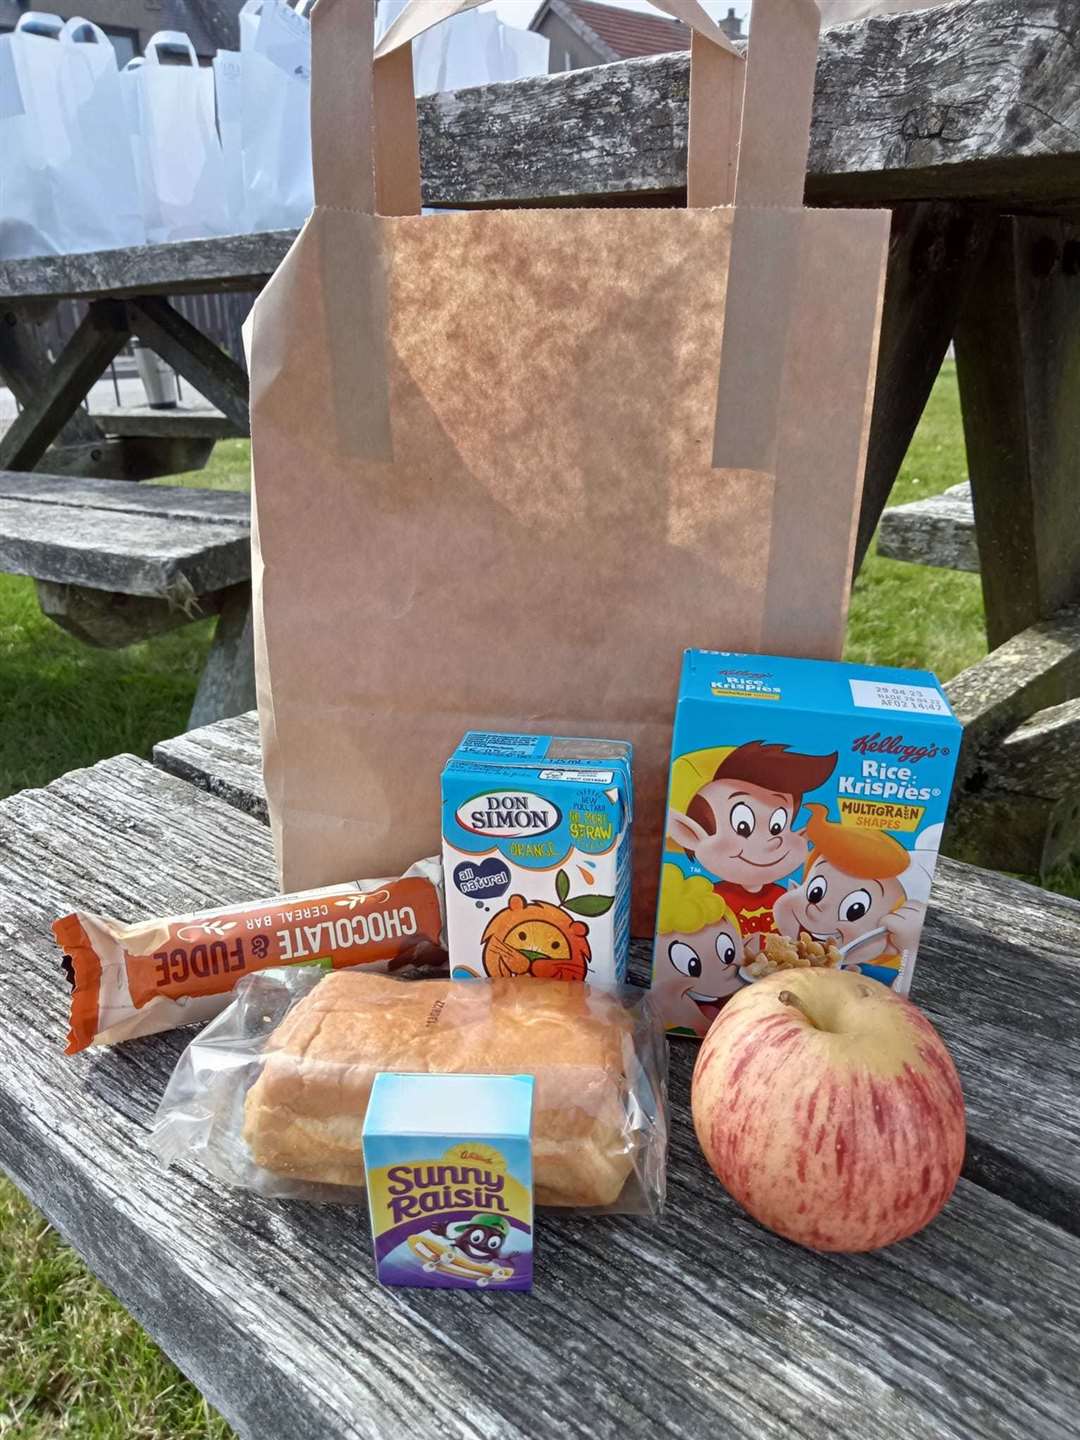 The breakfast pack contains cereal and fruit as well as juice, bread, raisins and a chocolate fudge bar.